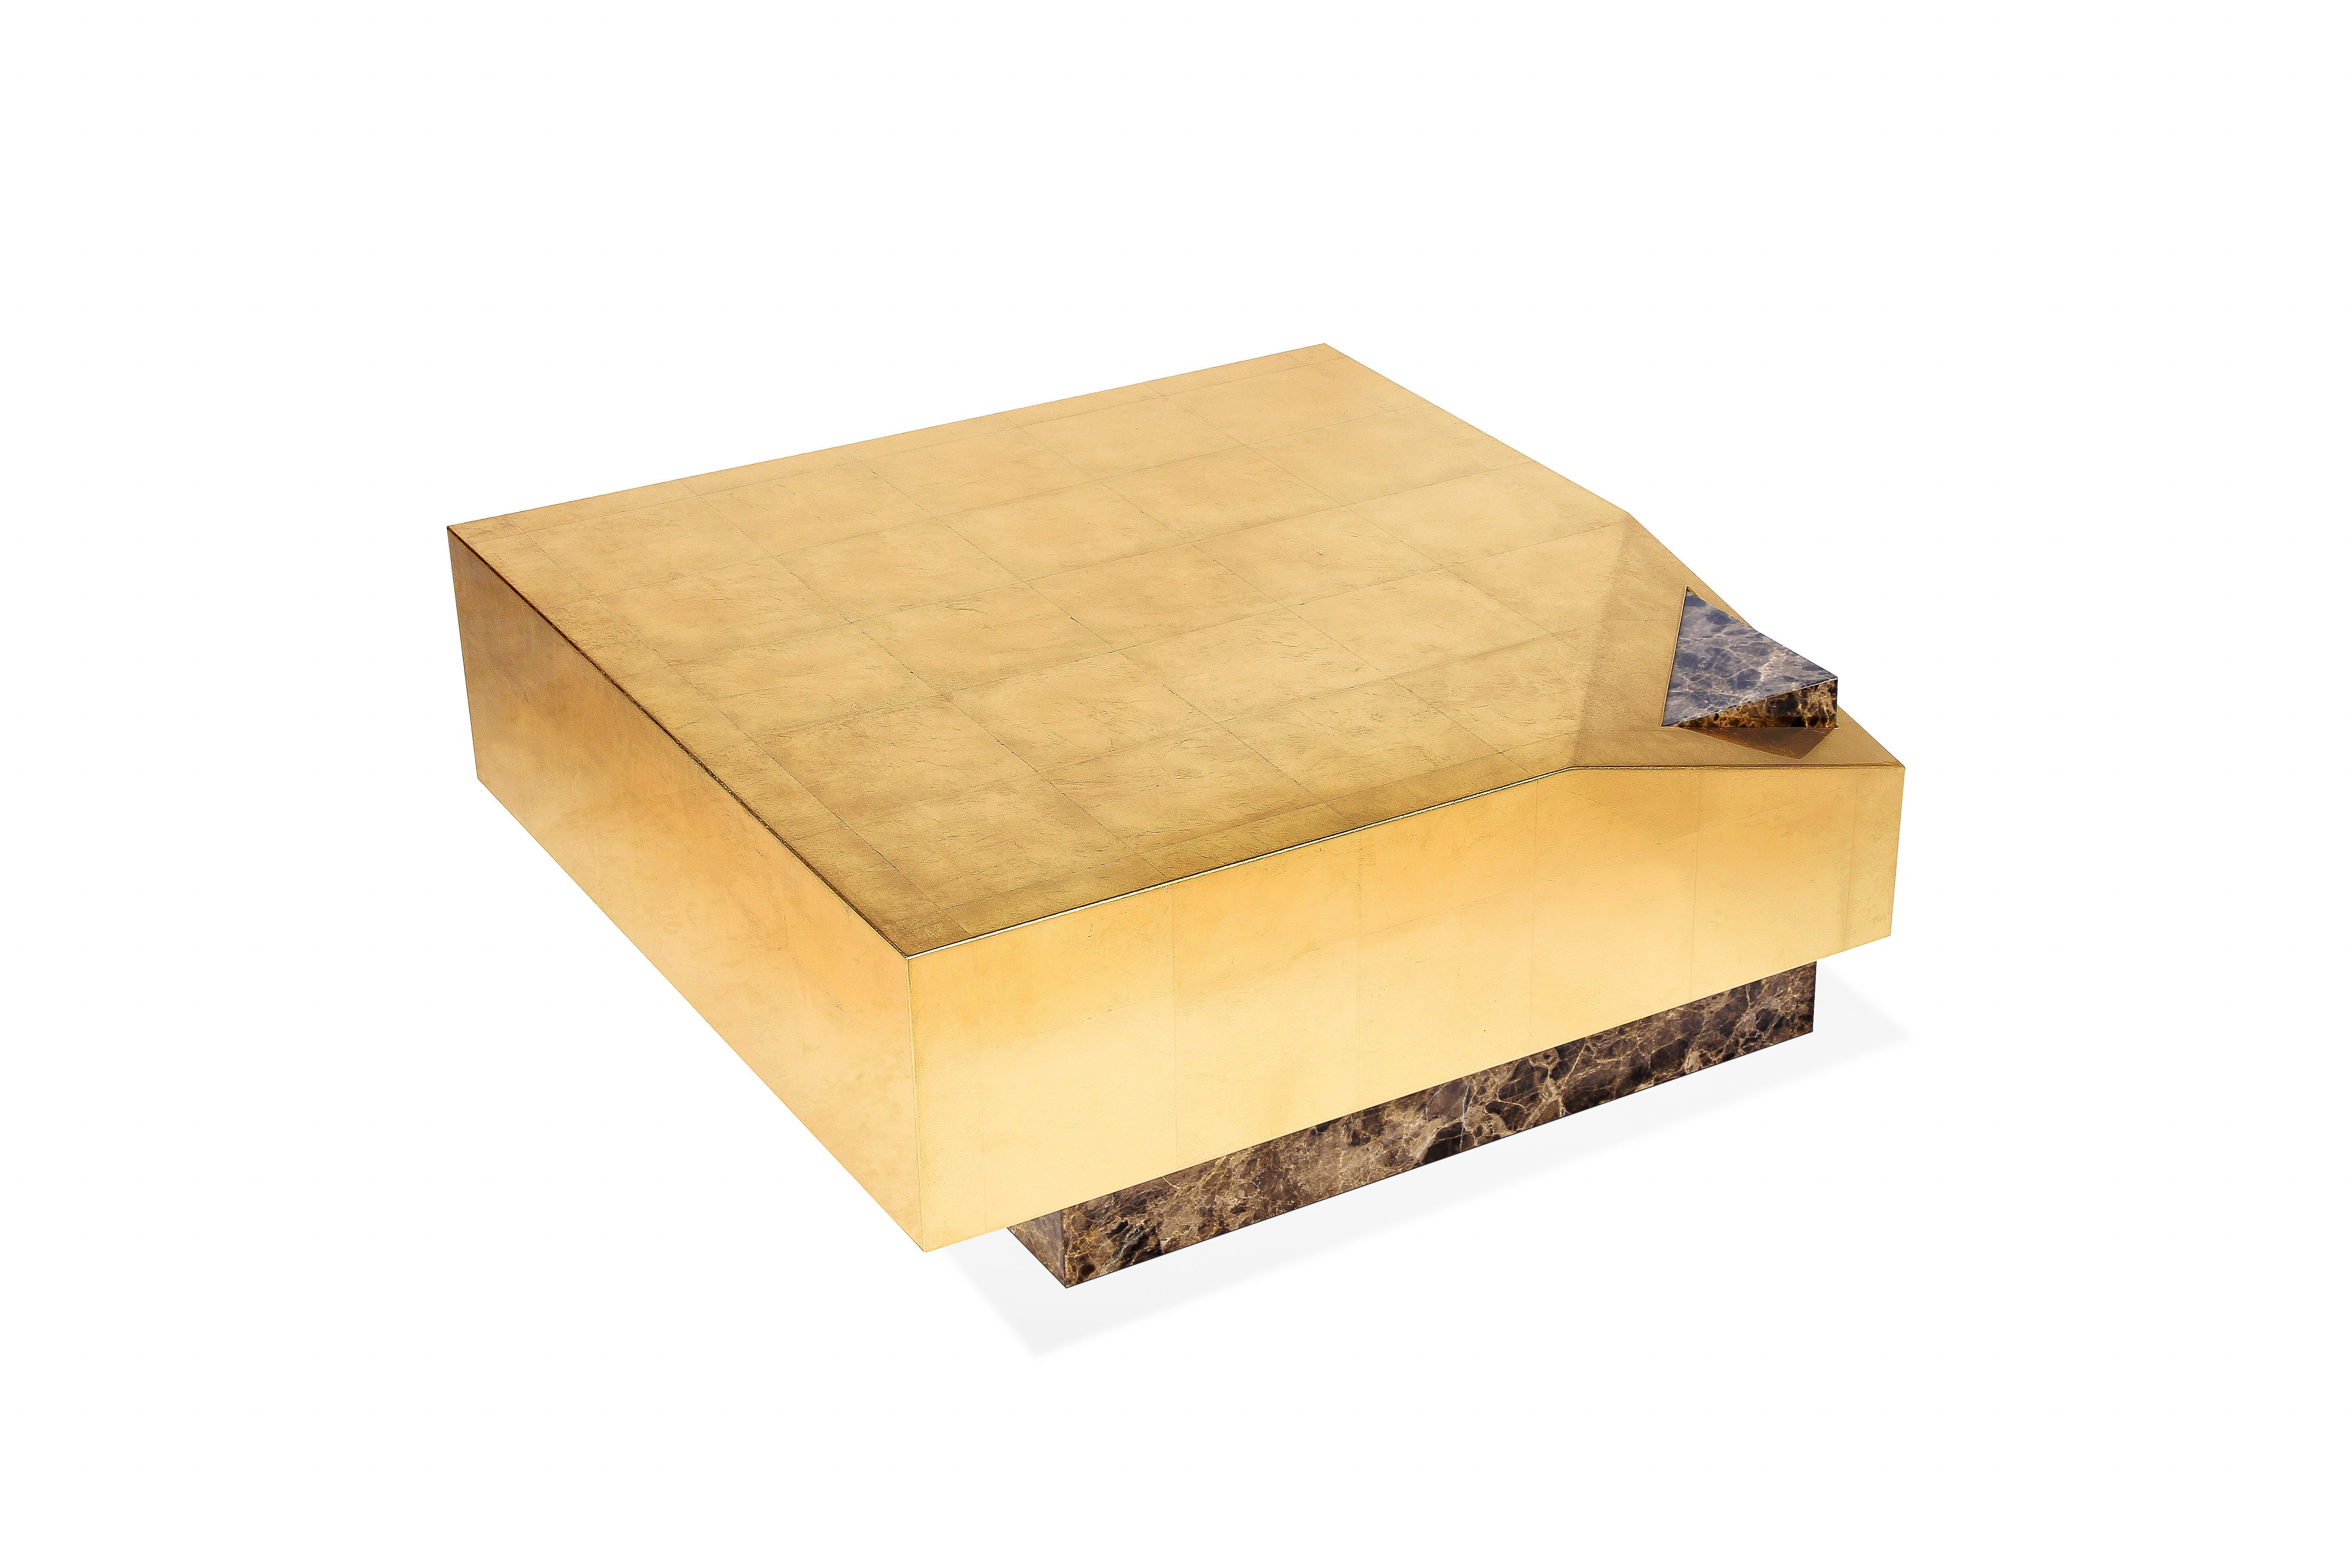 Vaz center table by Royal Stranger
Dimensions: 80 x 80 x 32 cm
Materials: Emperador Marble with polished finish with gold leaf top with glossy finish.

Inspired by the merchant marine and the Portuguese Discoveries, the Vaz center table is born